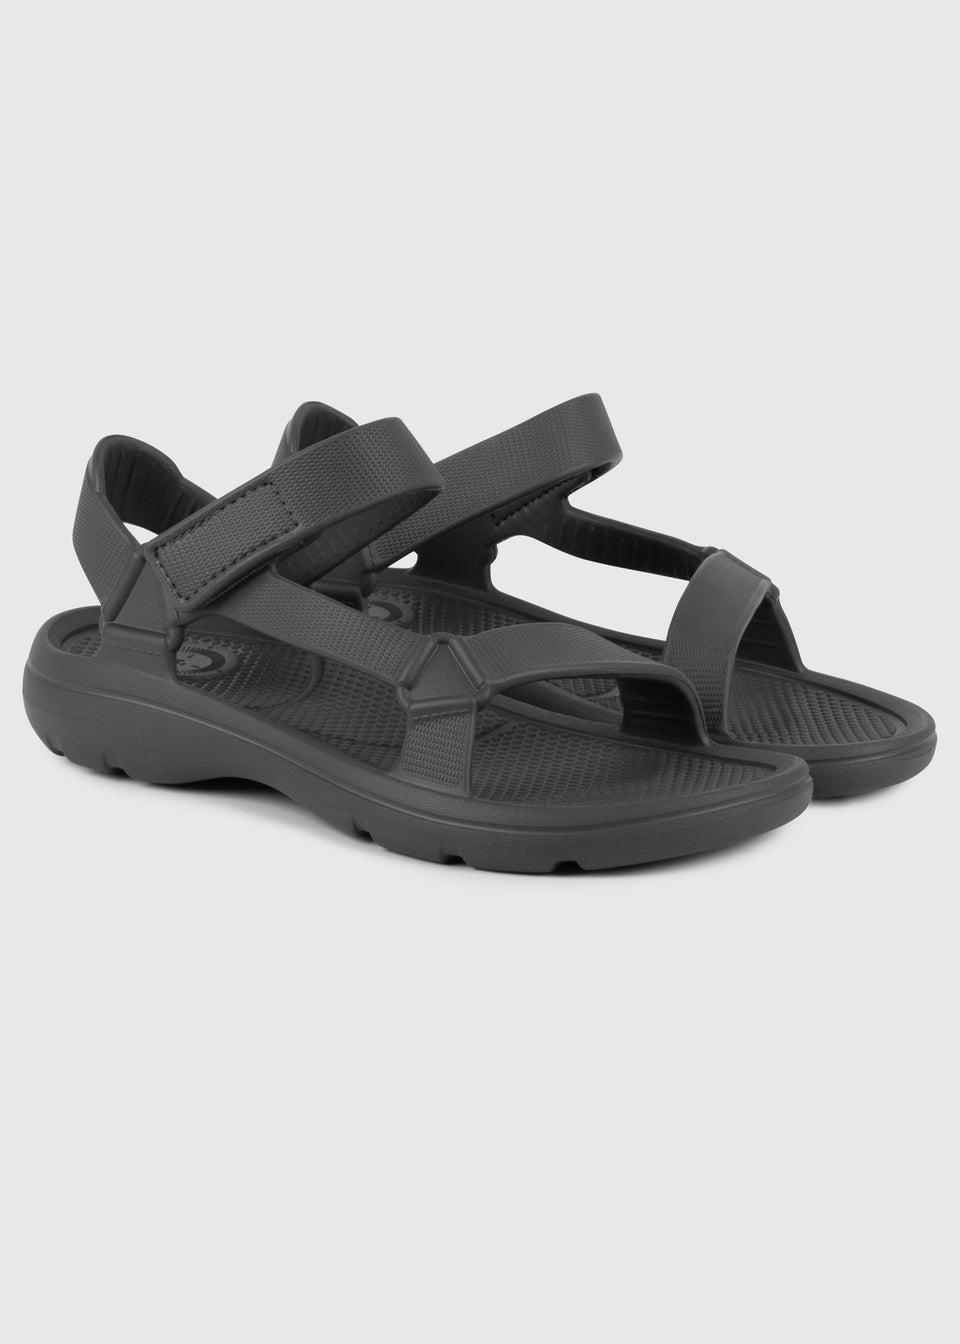 Totes Solbounce Grey Sport Sandal